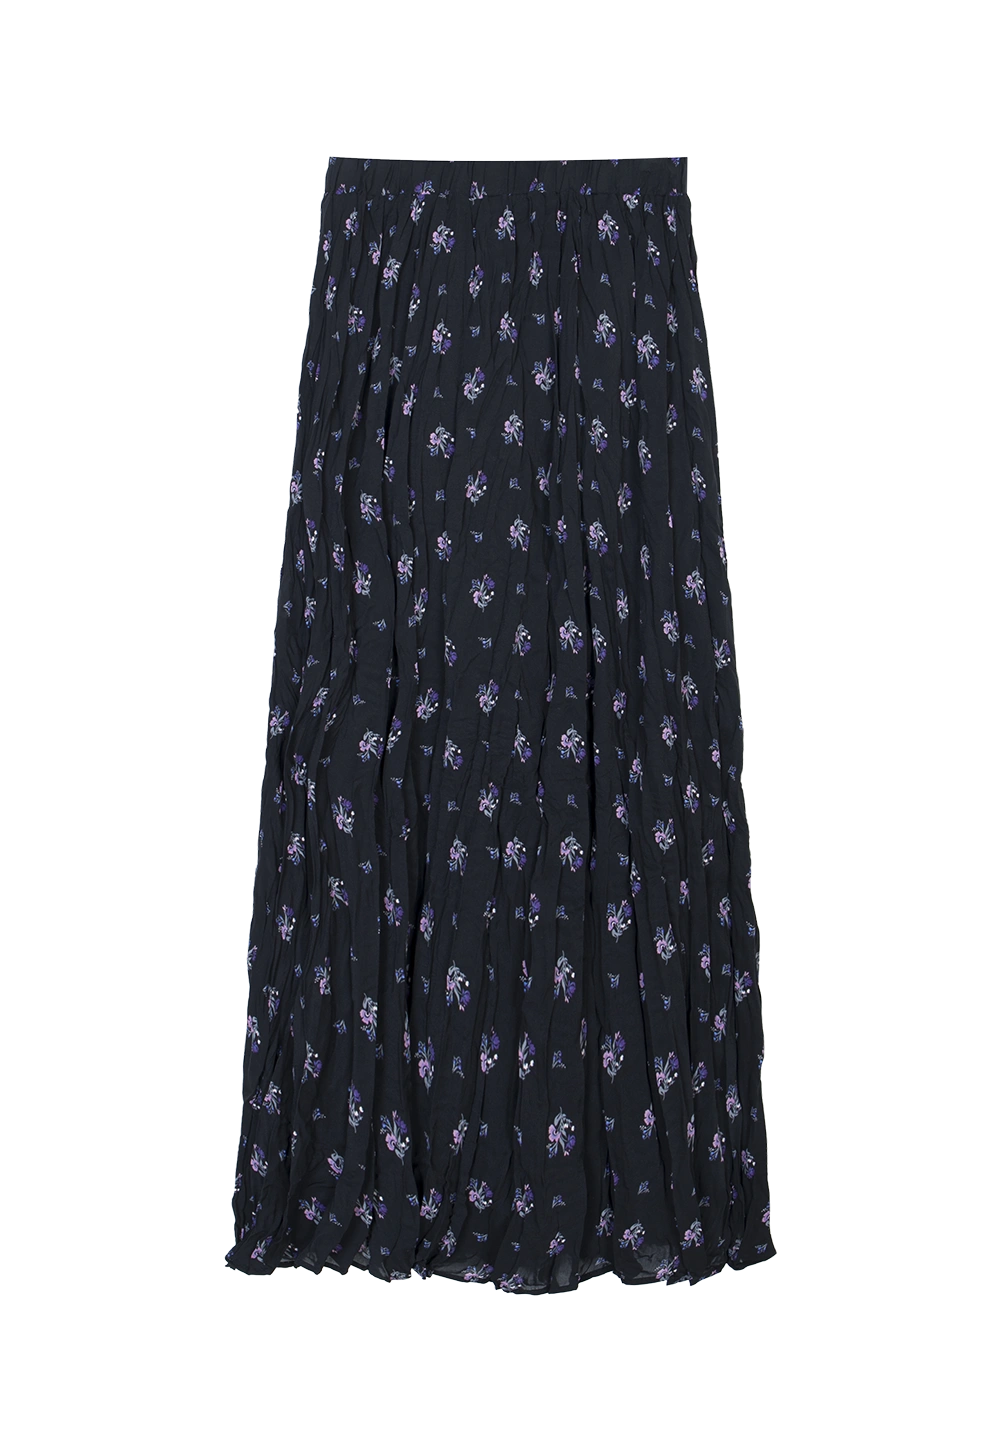 Women's Floral Pleated Midi Skirt - Lightweight, Flowing Design for Spring and Summer